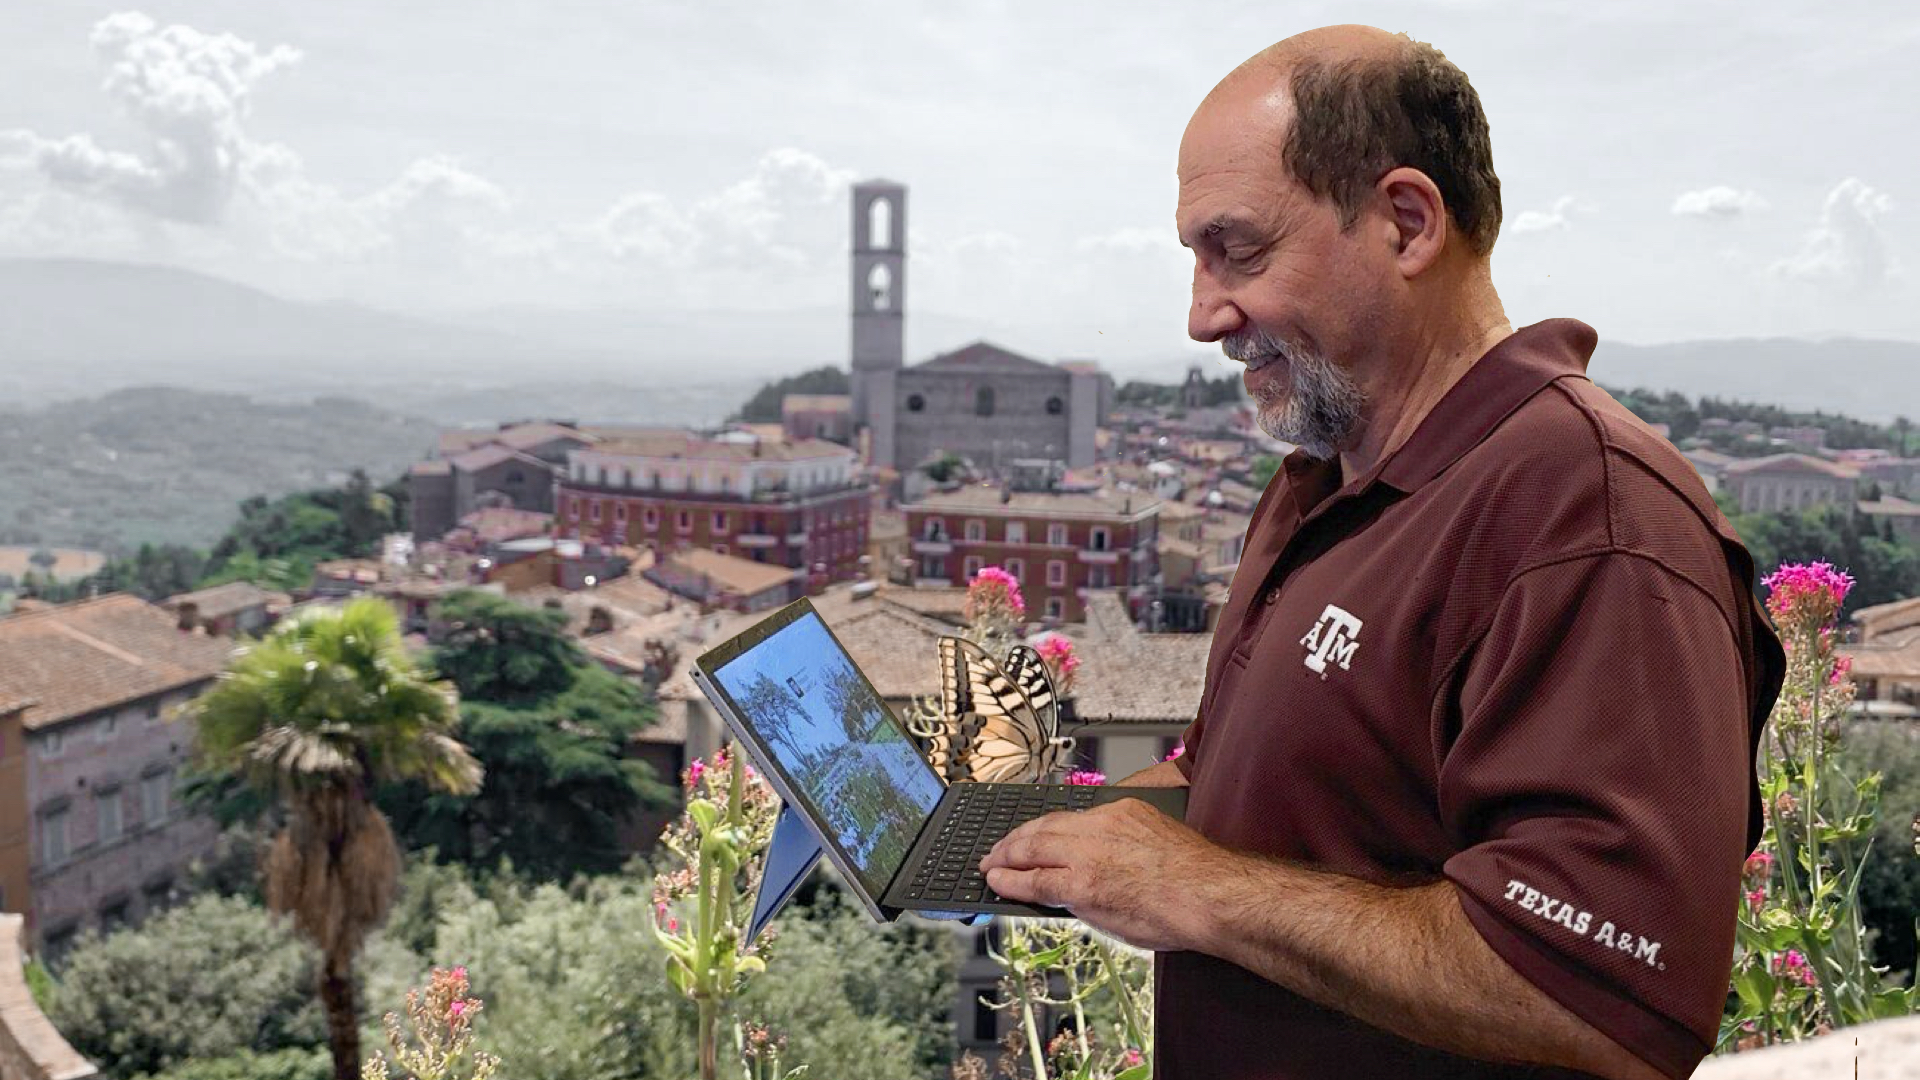 Composite illustration of Castiglion Fiorentino, Italy, and Rick Greig using a laptop.